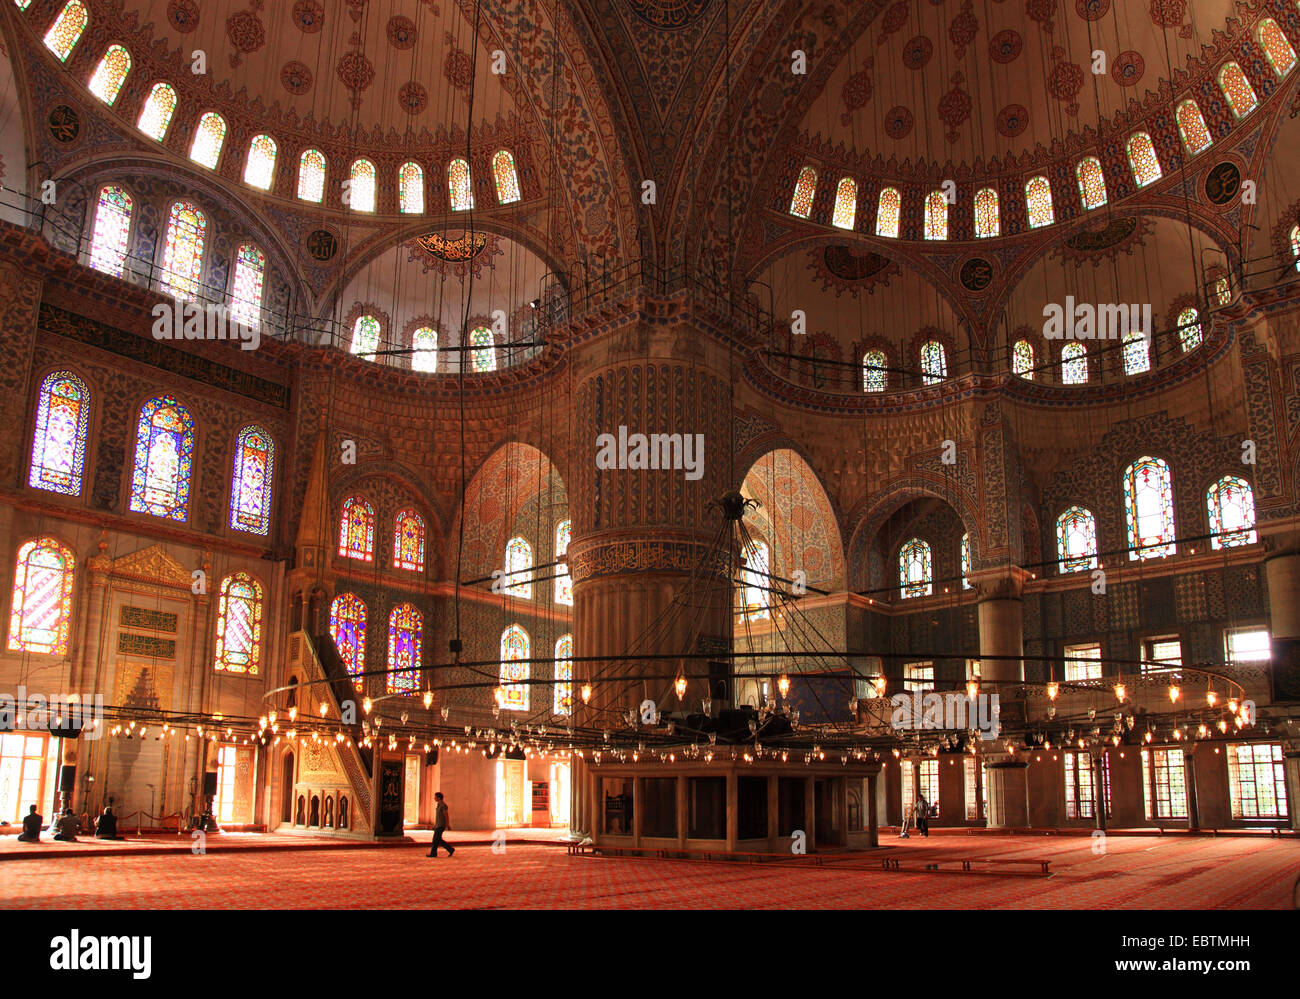 Sultan Ahmed Mosque, Blue Mosque, Innenraum, Turkey, Istanbul Stock Photo